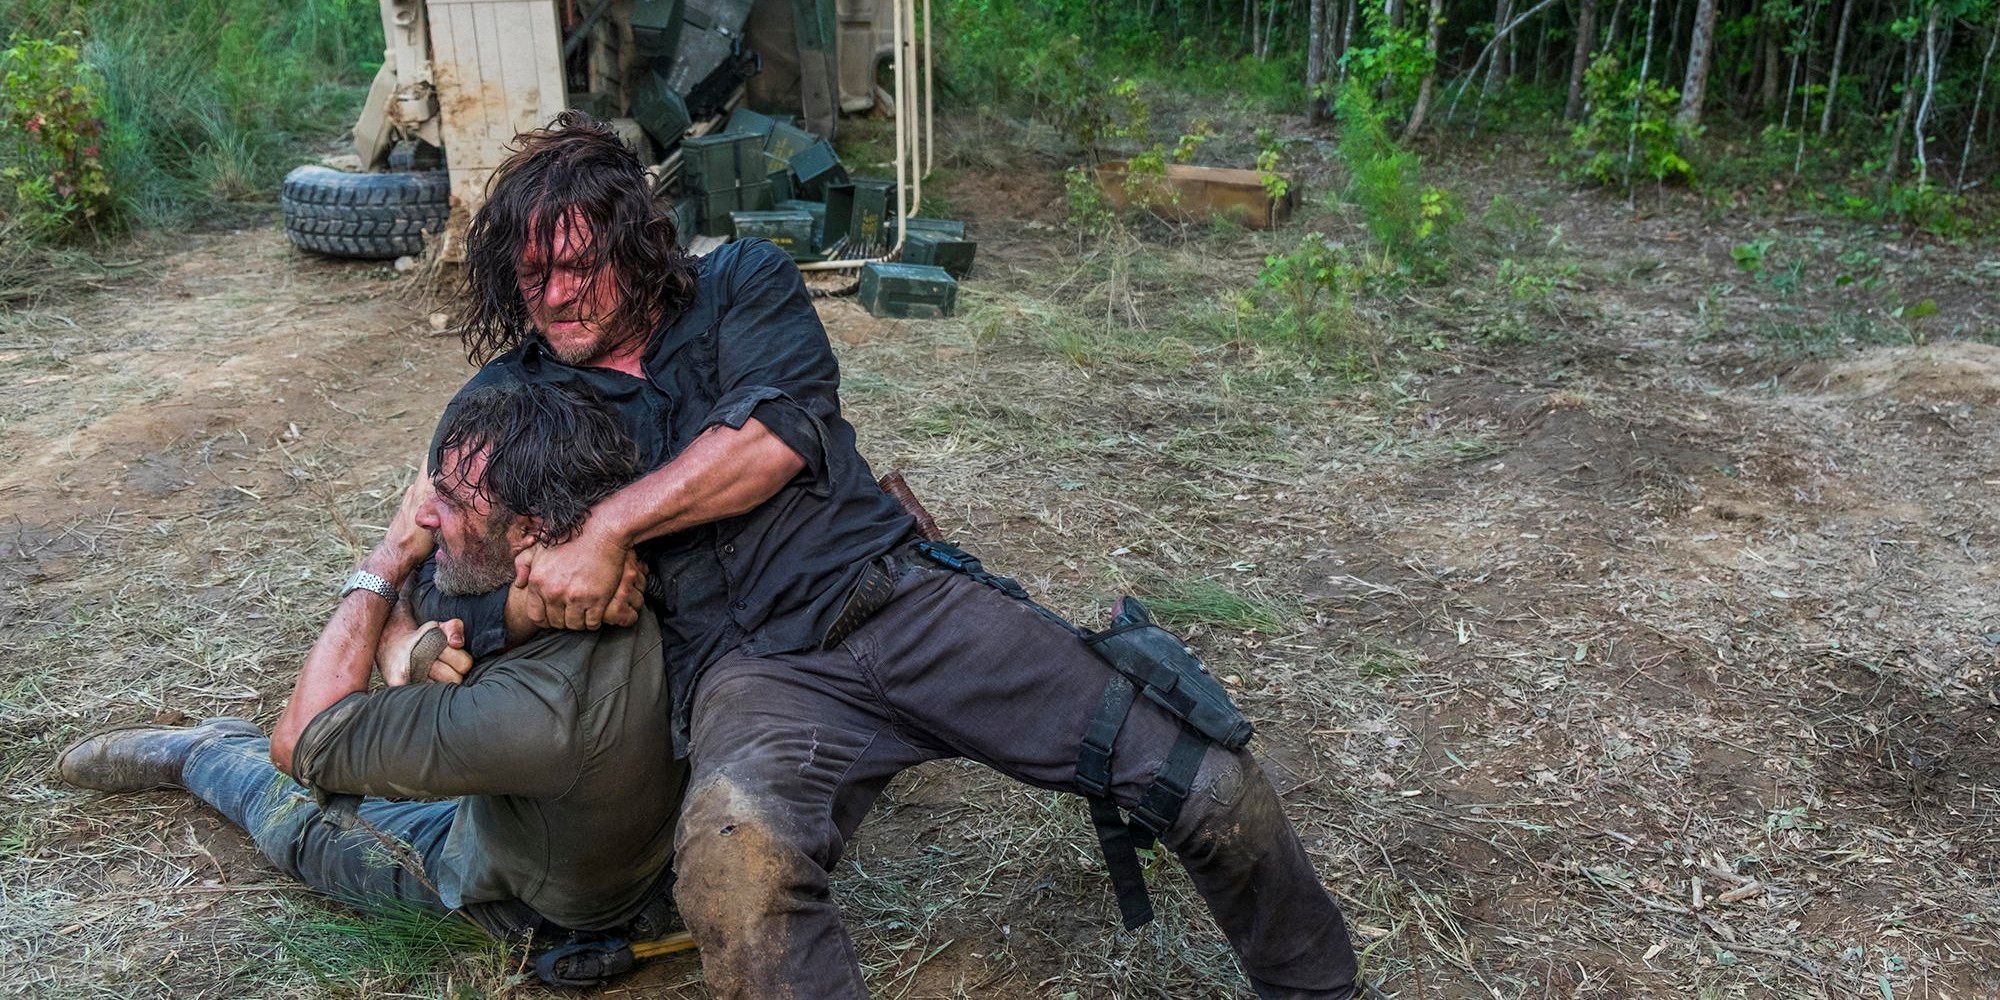 Andrew Lincoln as Rick Grimes and Norman Reedus as Daryl Dixon in The Walking Dead